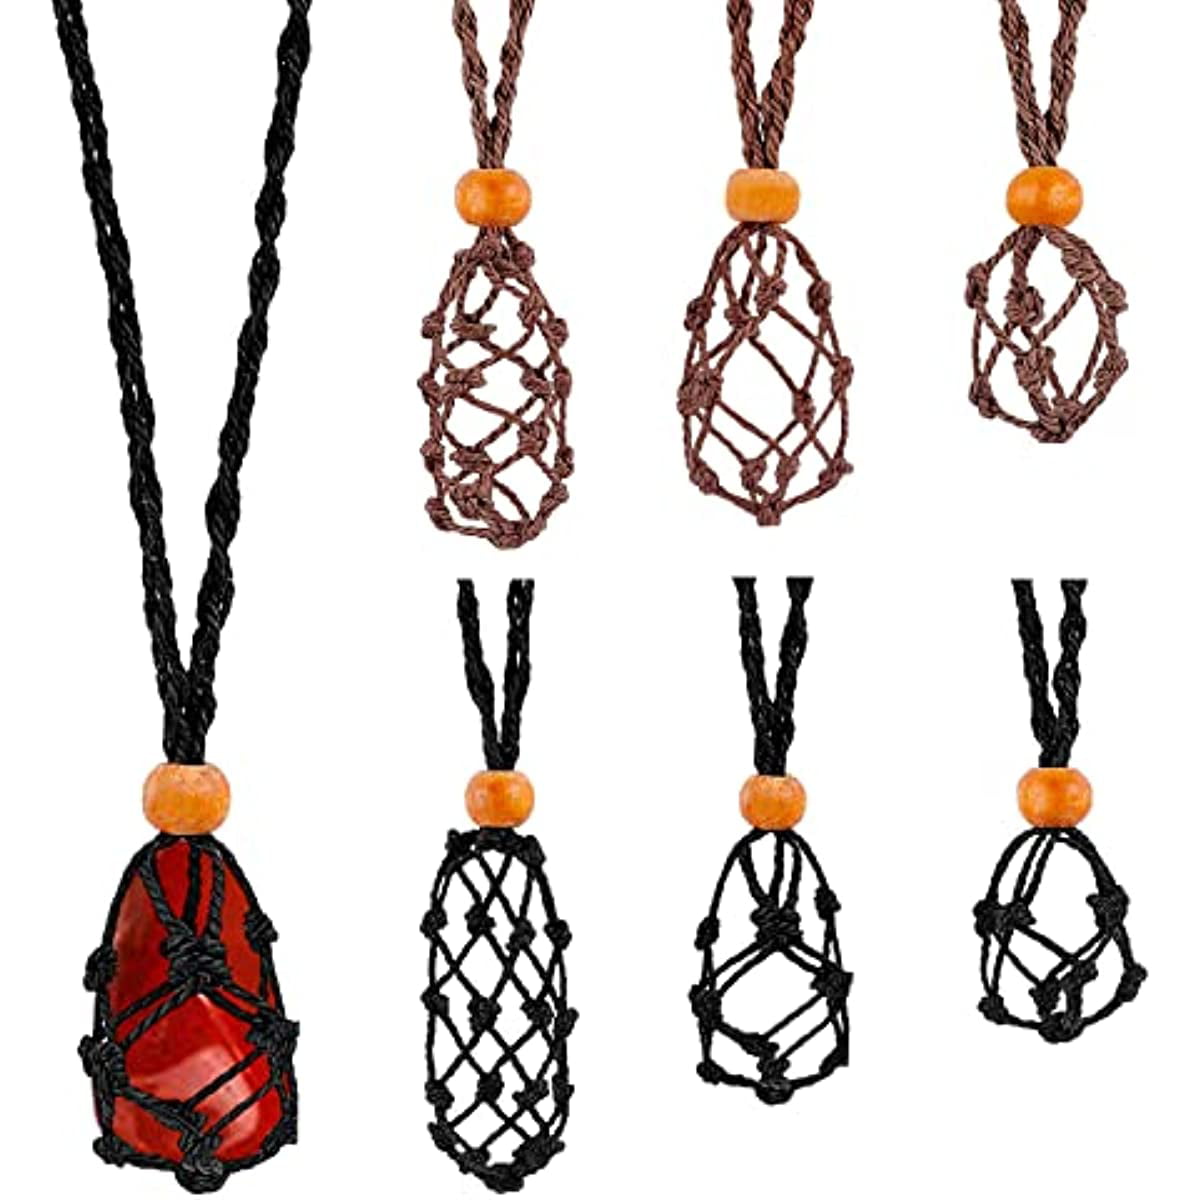 6pcs Empty Stone Holder Pendant 2 Color Crystal Necklace Holder Cord  Adjustable Woven Necklace Crystal Cage Holder Rope Pendant for for Stone  DIY Bracelet Necklace Jewelry Supplies 